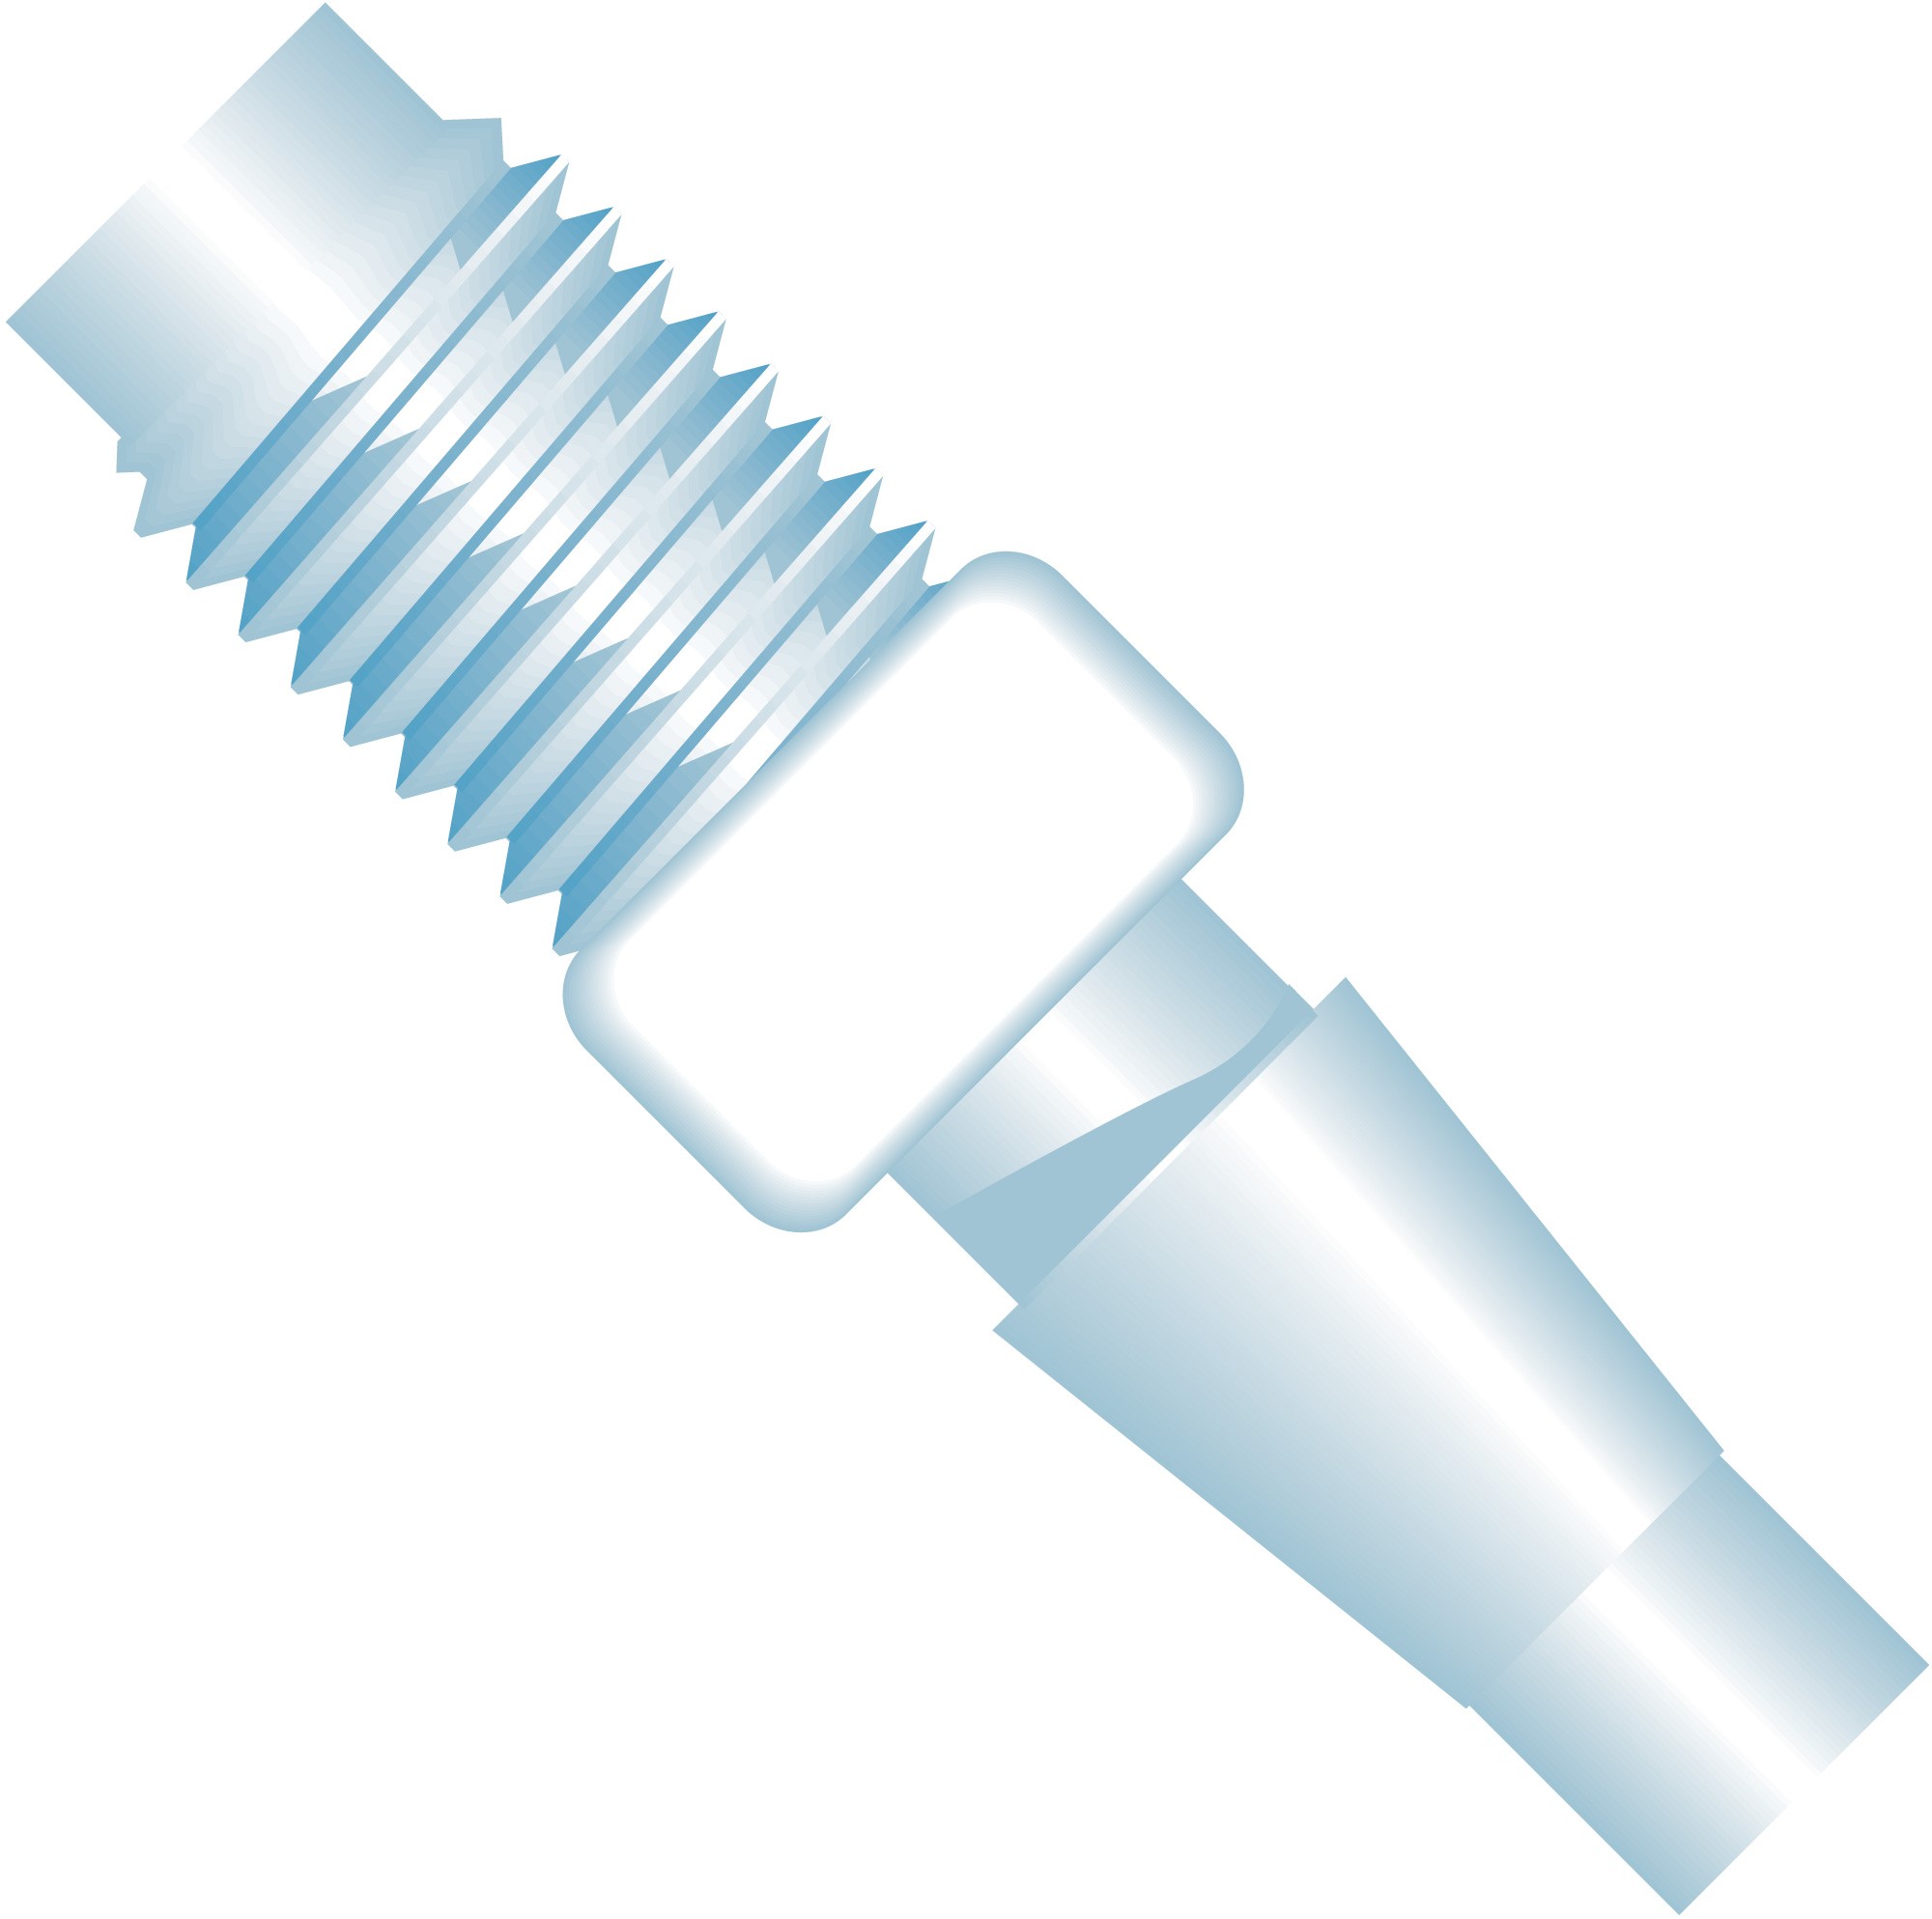 Adapters & Connectors: Barbed to Thread Adapter, 5/16"-24 Flat Bottom to 3/16â (4.75mm) ID, ETFE